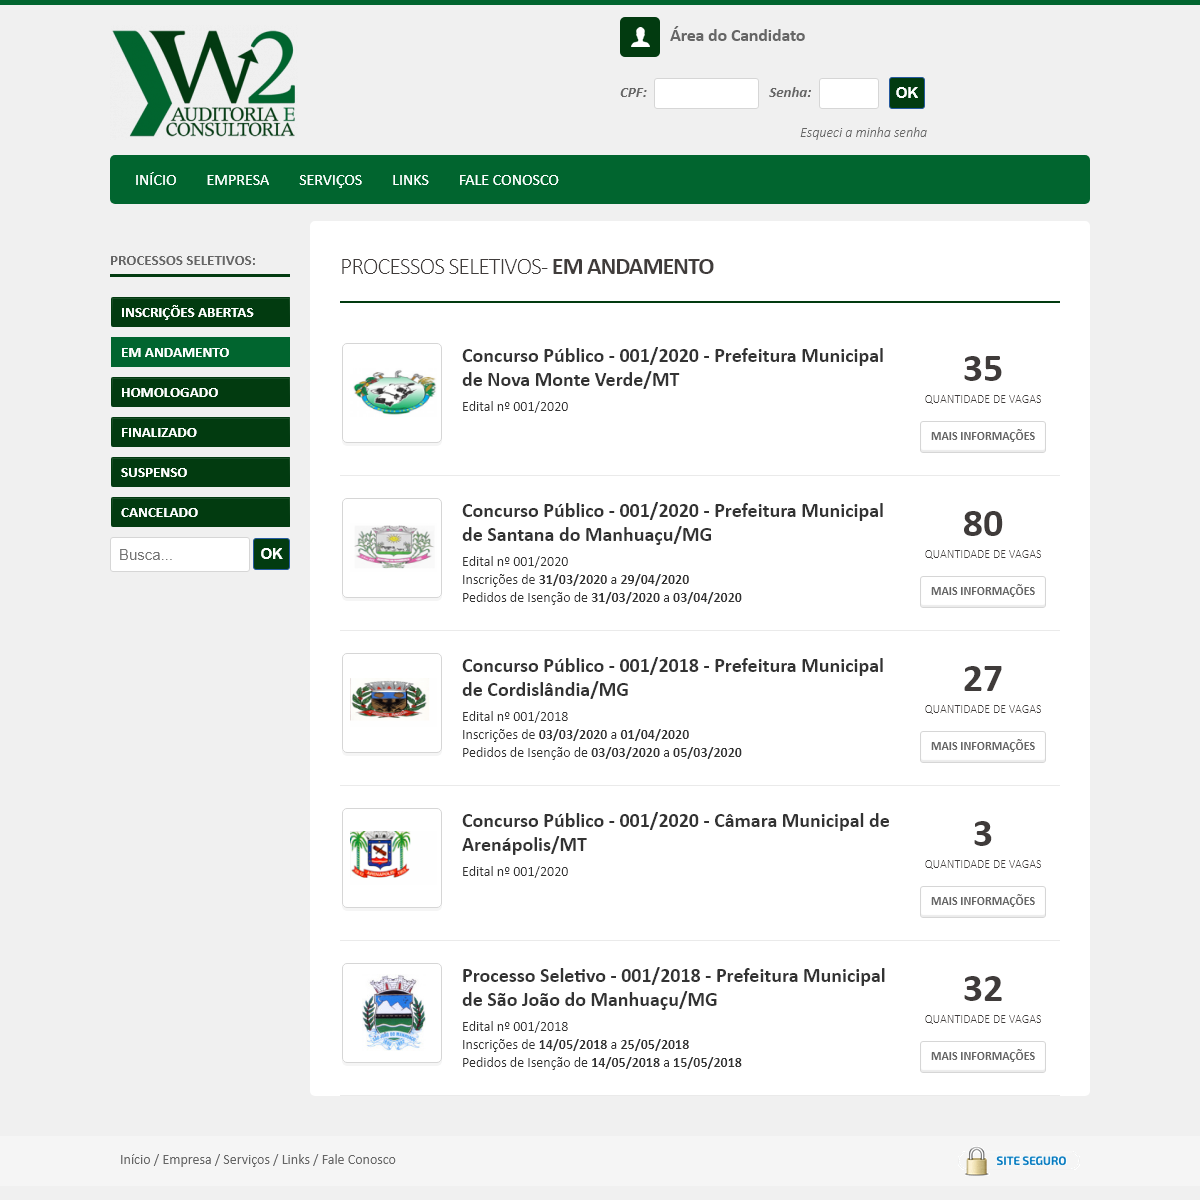 A complete backup of w2consultores.com.br